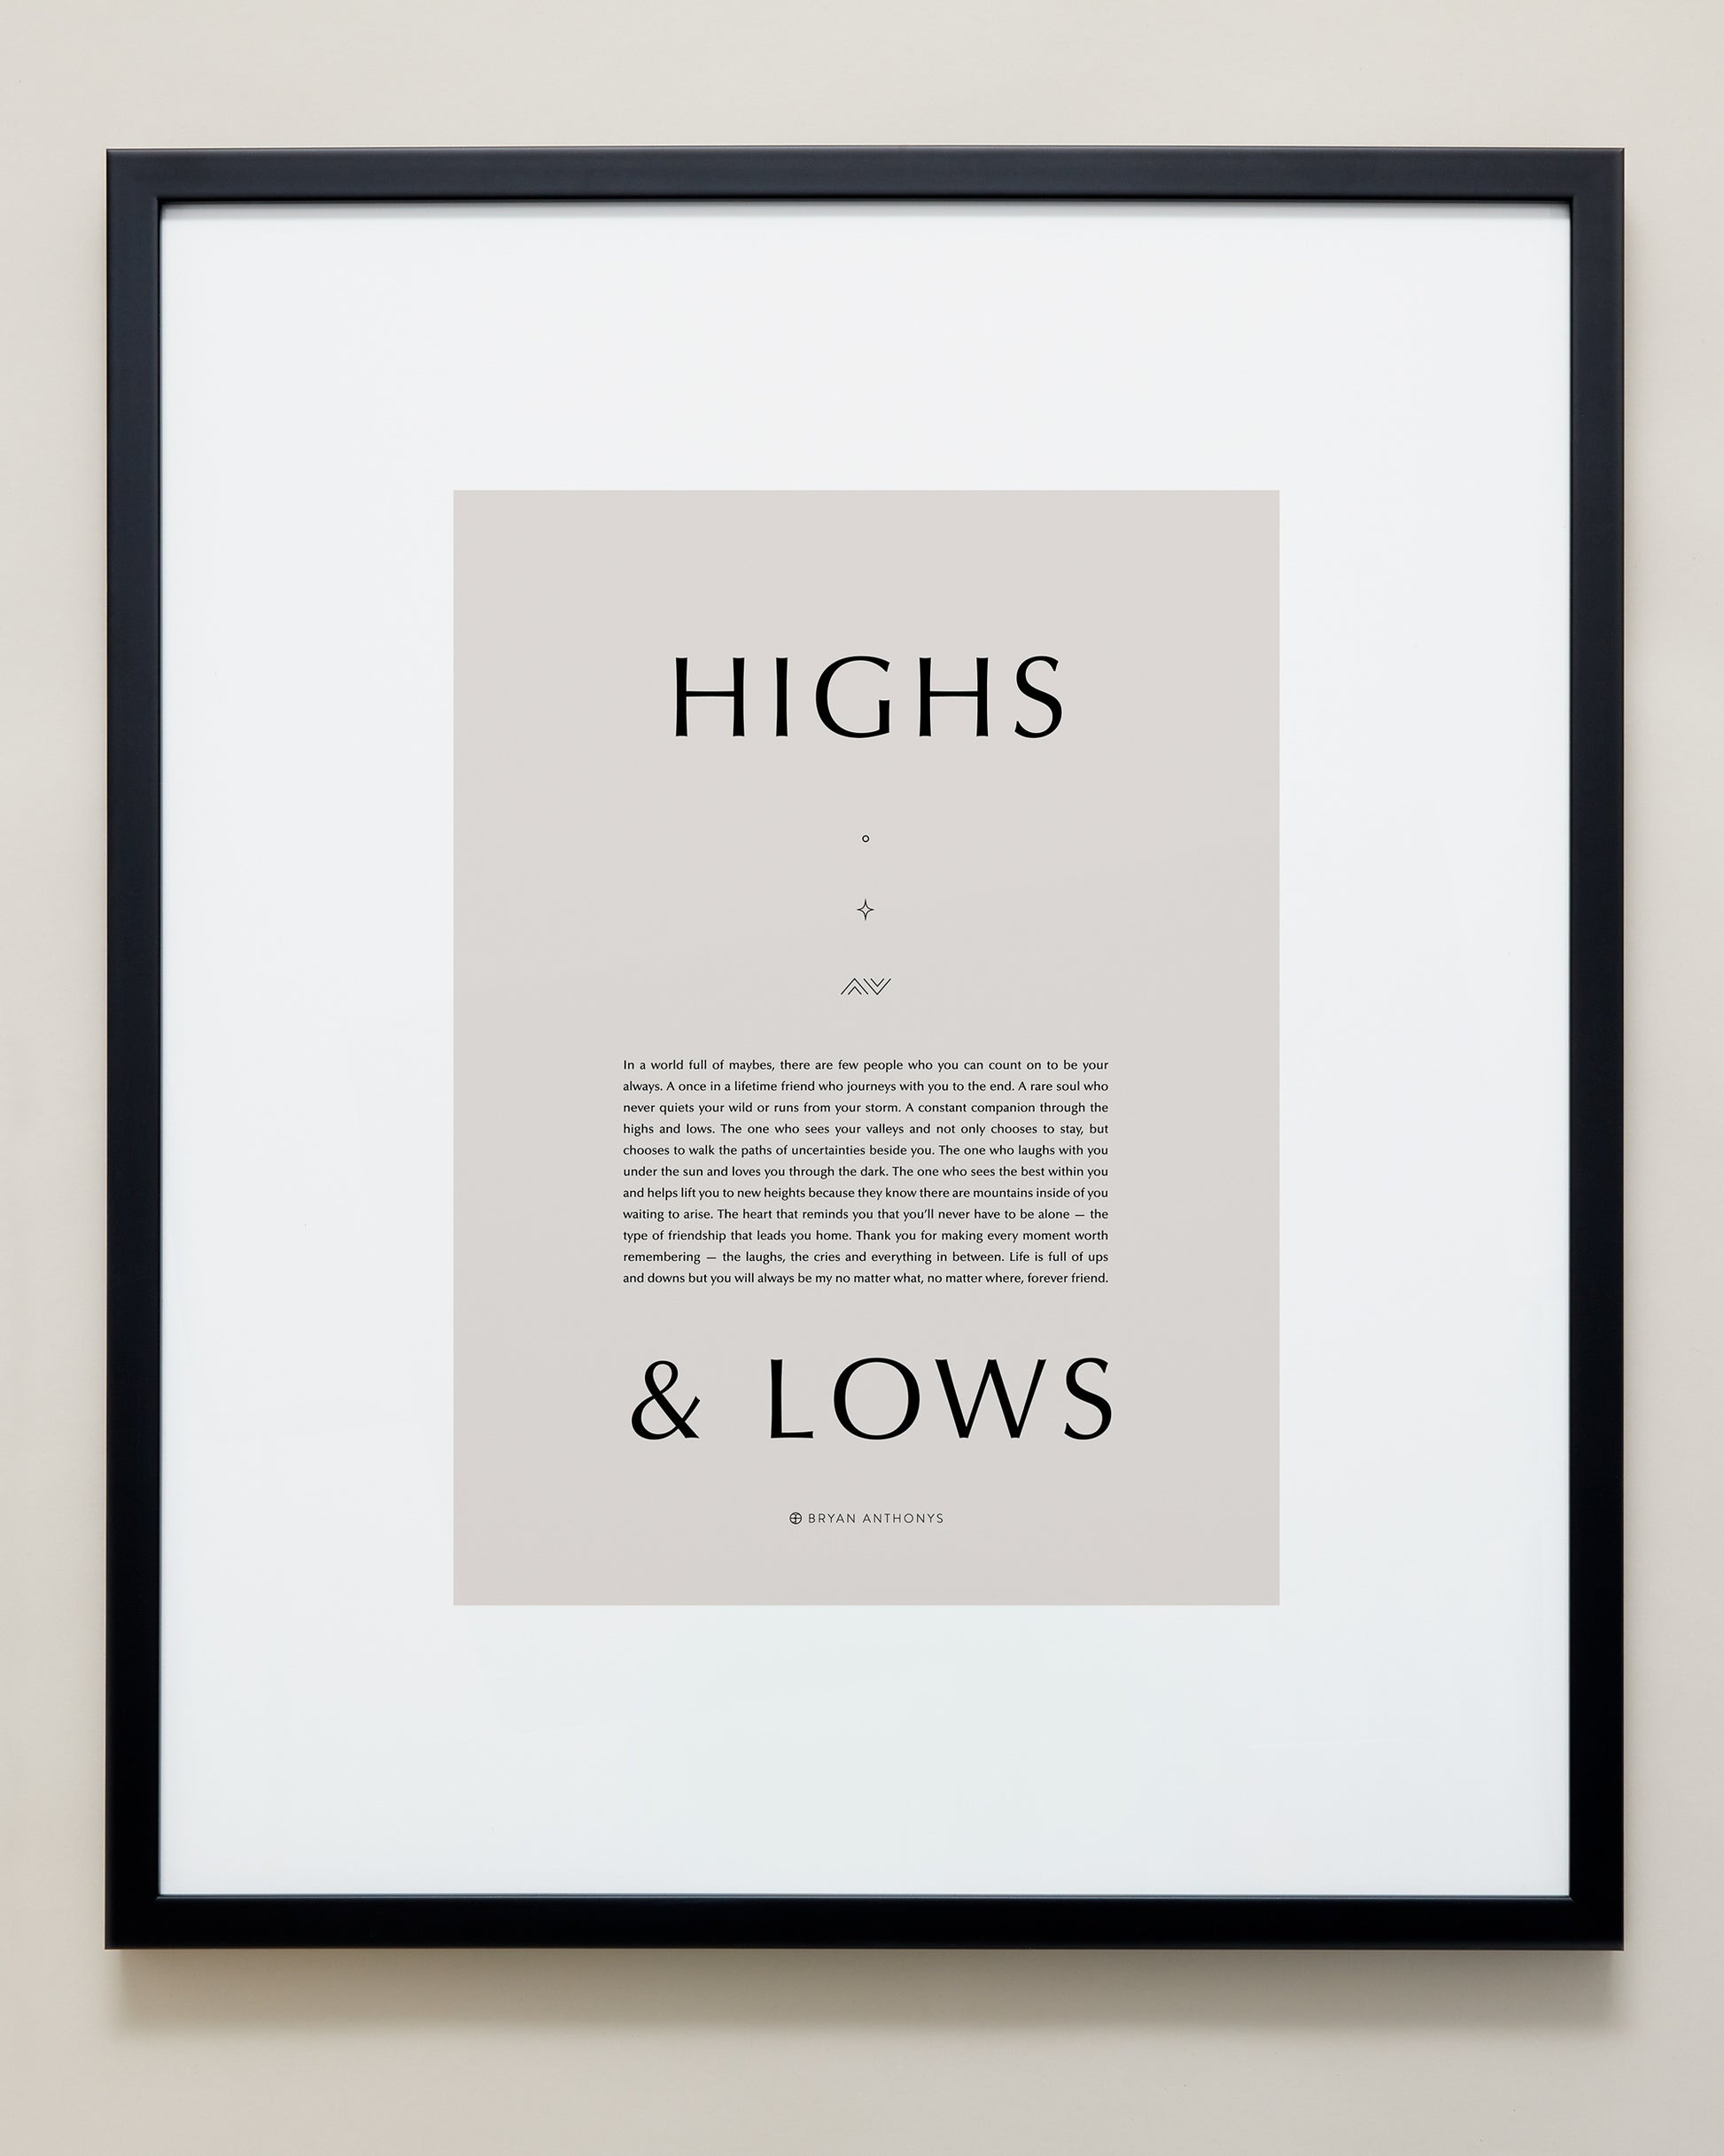 Bryan Anthonys Home Decor Purposeful Prints Highs and Lows Iconic Framed Print Black with Tan 20x24